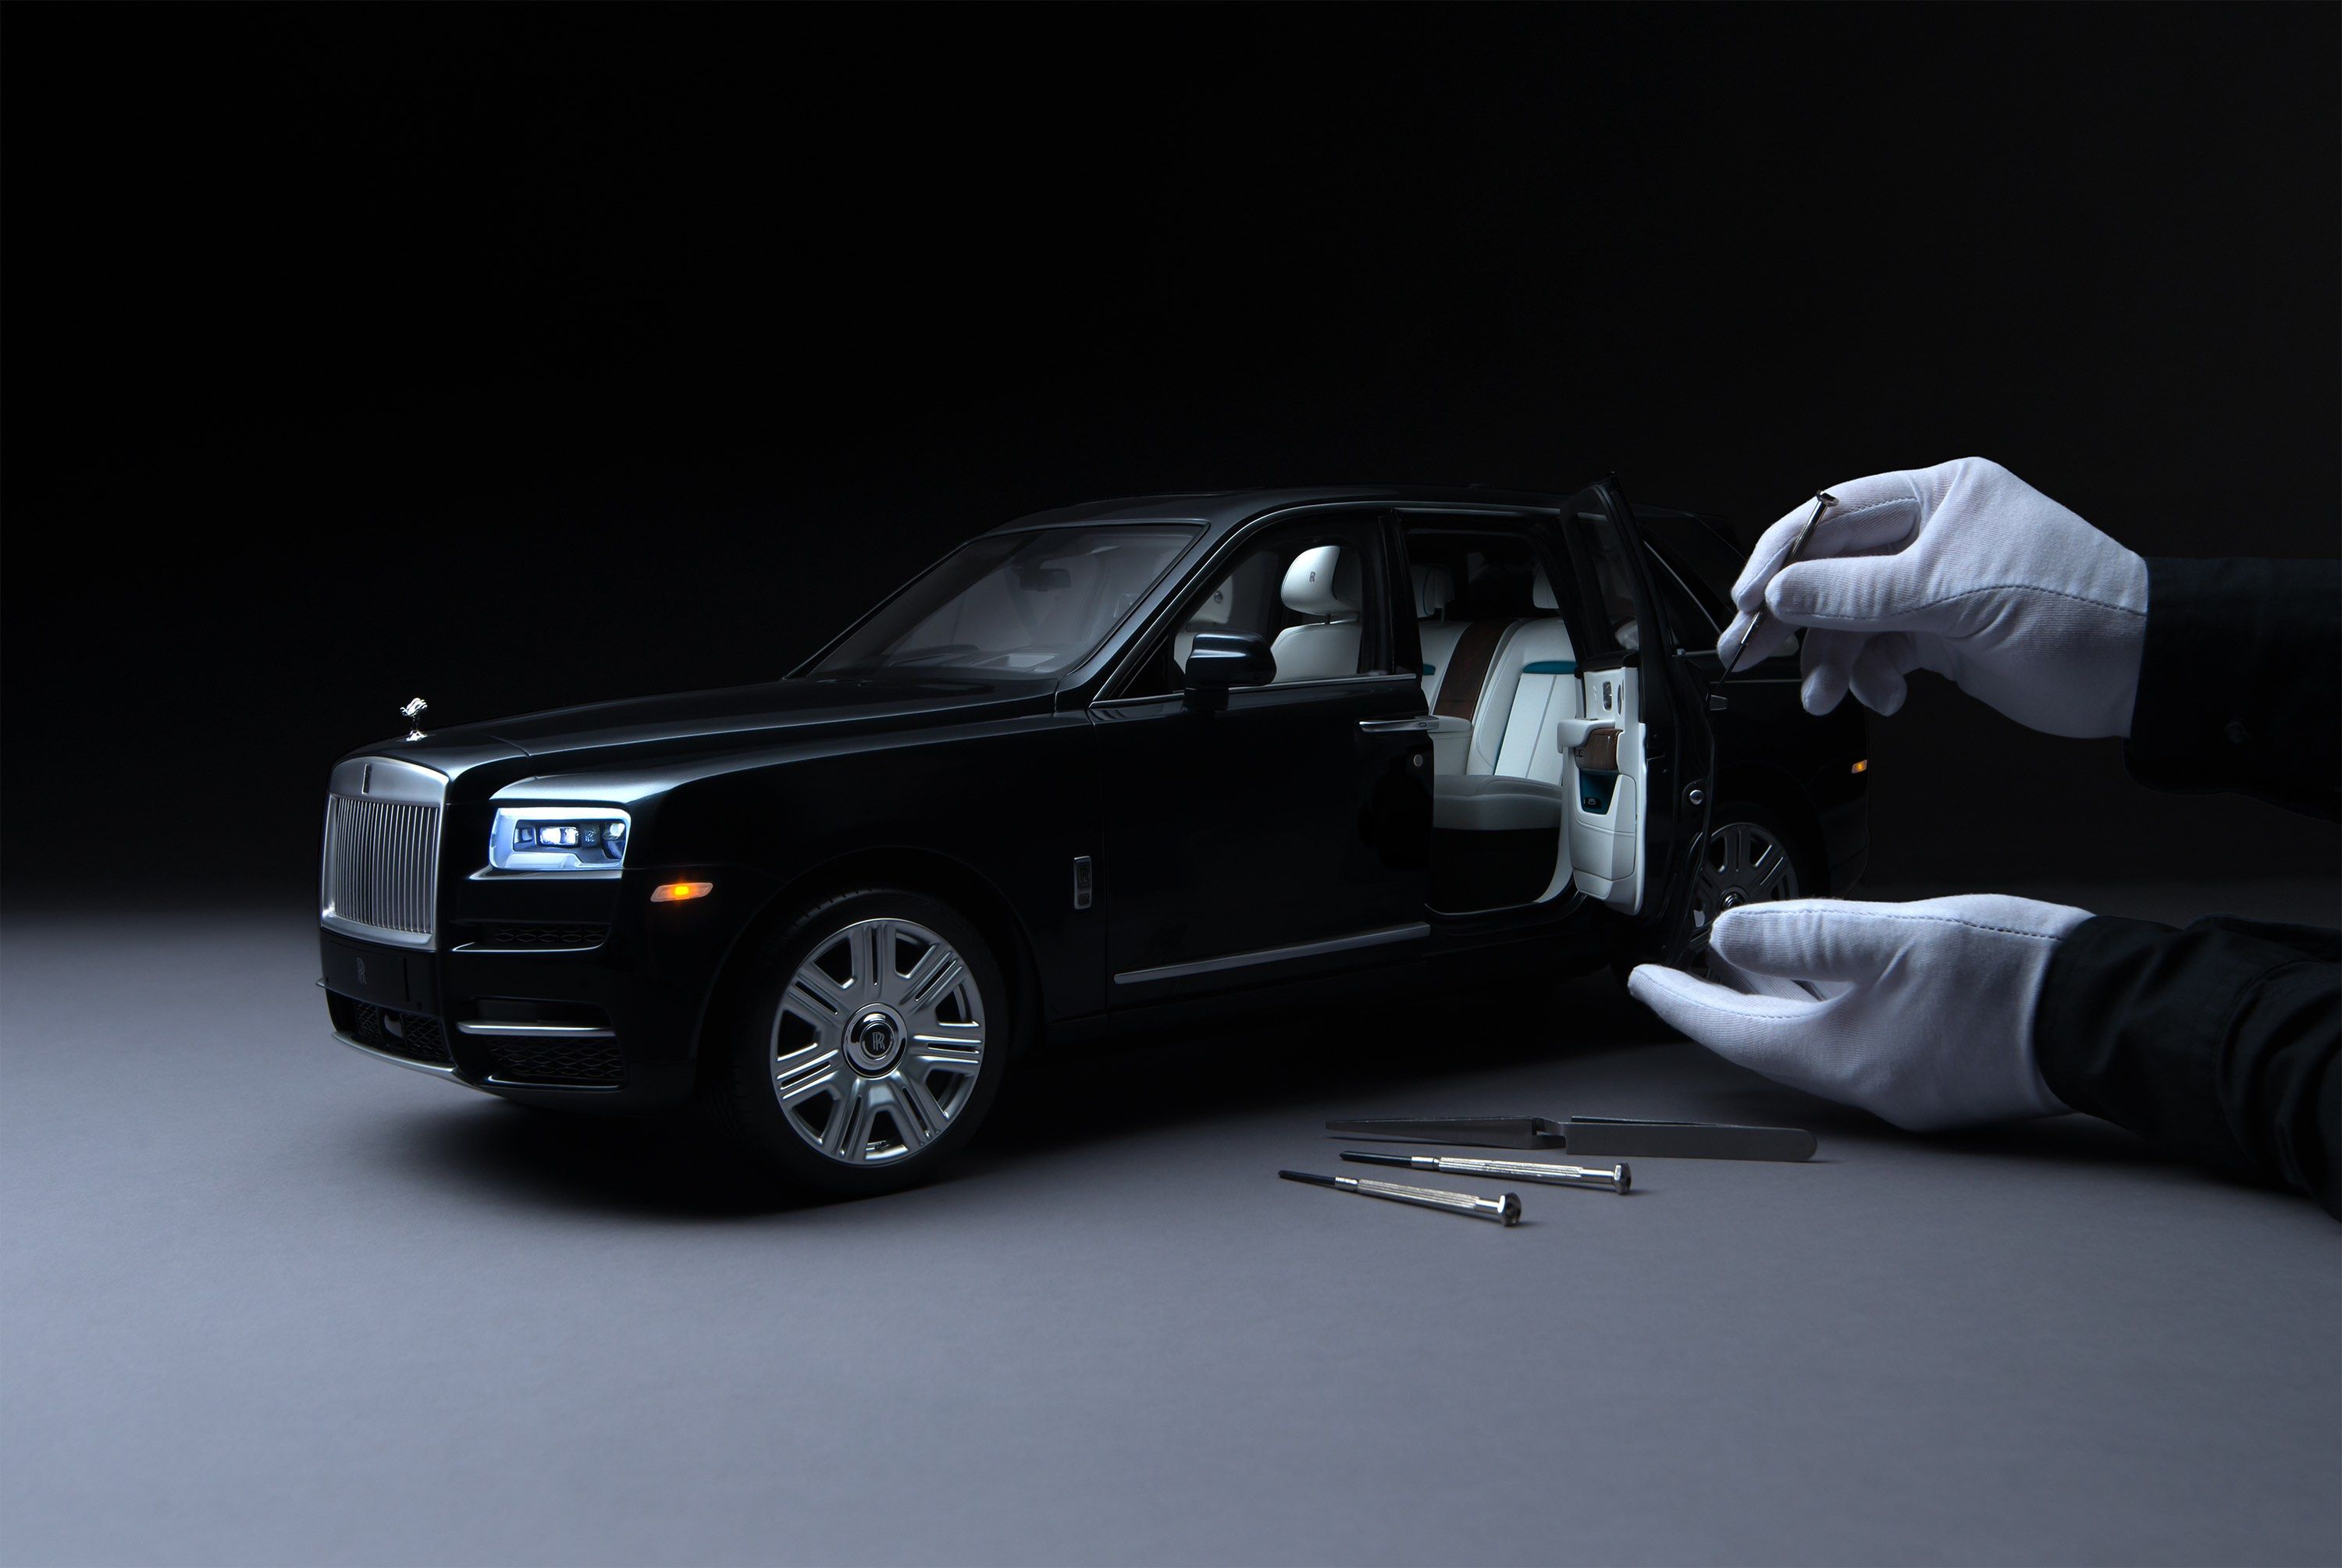 Miniature RollsRoyce Cullinan Model Car Aluminium DieCast Car Model in  164 Scale Simulation Luxury Interior Toy Car Collectors Decoration Set  Collectors Gifts for Adults and Teenagers YQINGB Amazonde Toys